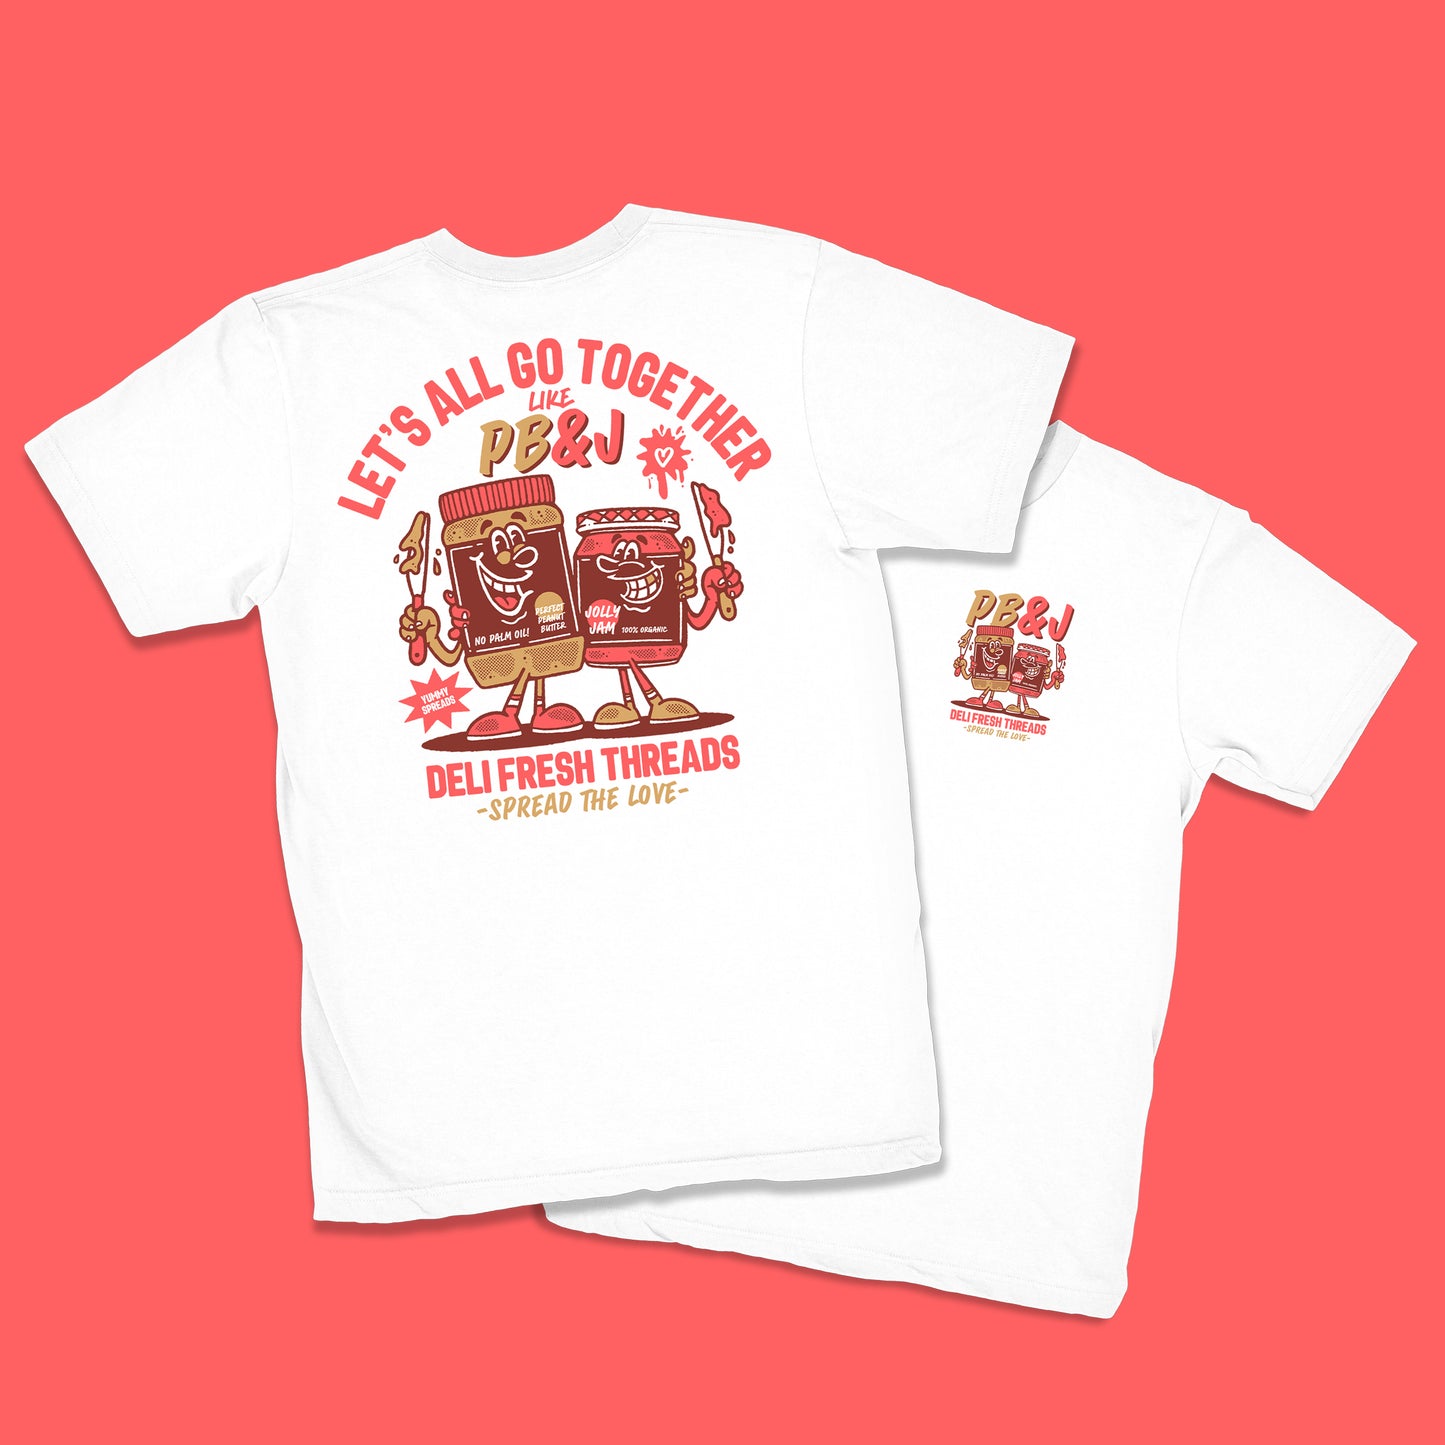 mockup of the front and back of the peanut butter and jelly shirt- spread the love